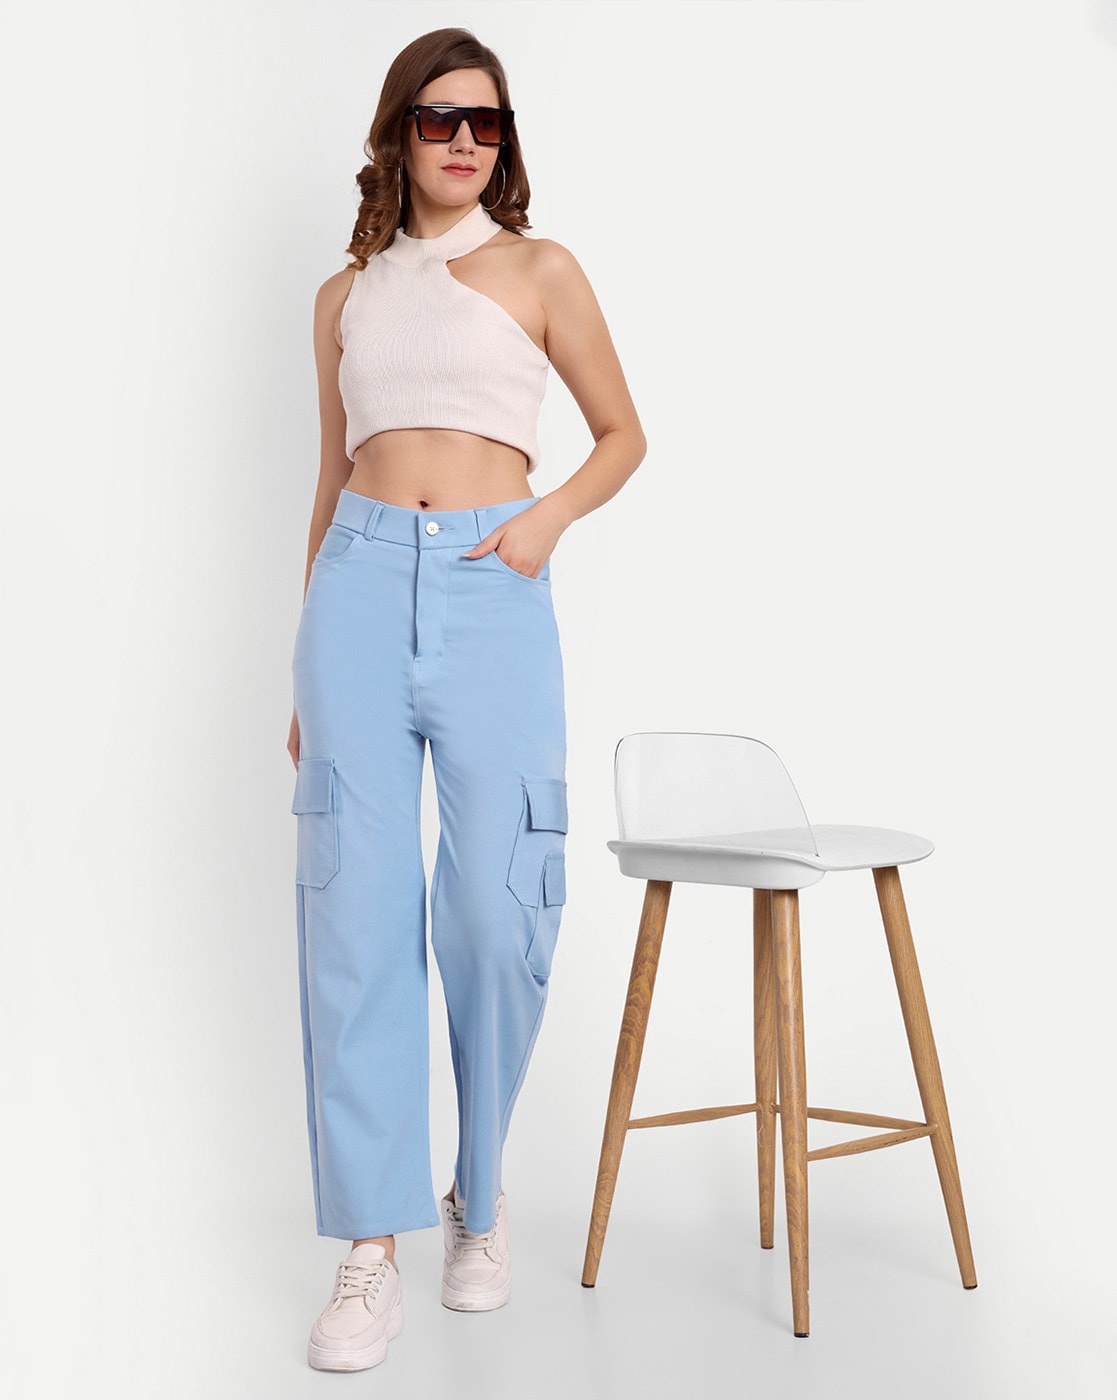 Buy ALLEN SOLLY Light Blue Textured Regular Fit Polyester Womens Formal  Wear Trousers | Shoppers Stop